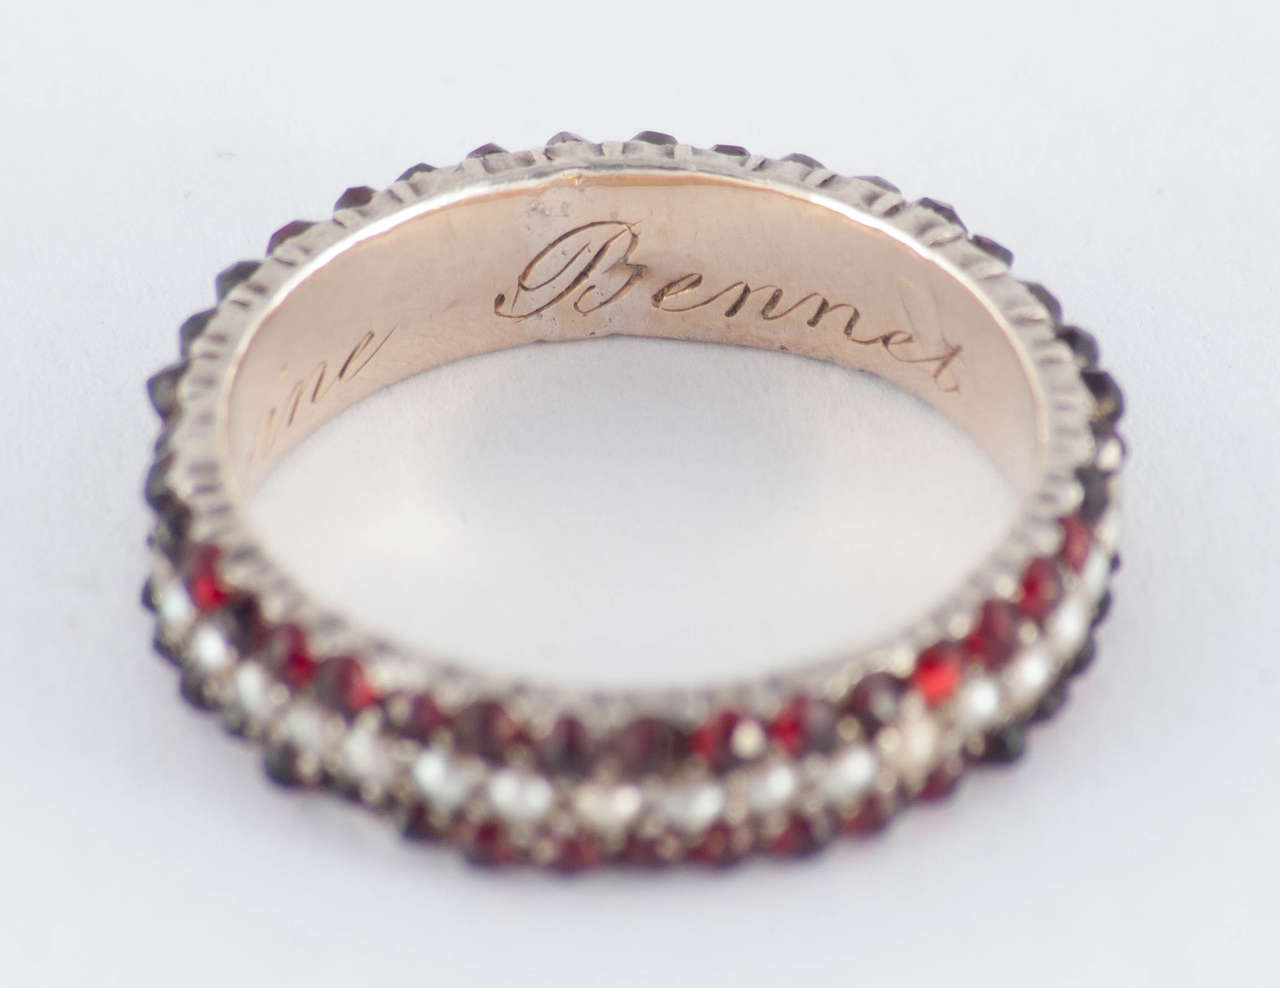 pearl and garnet ring